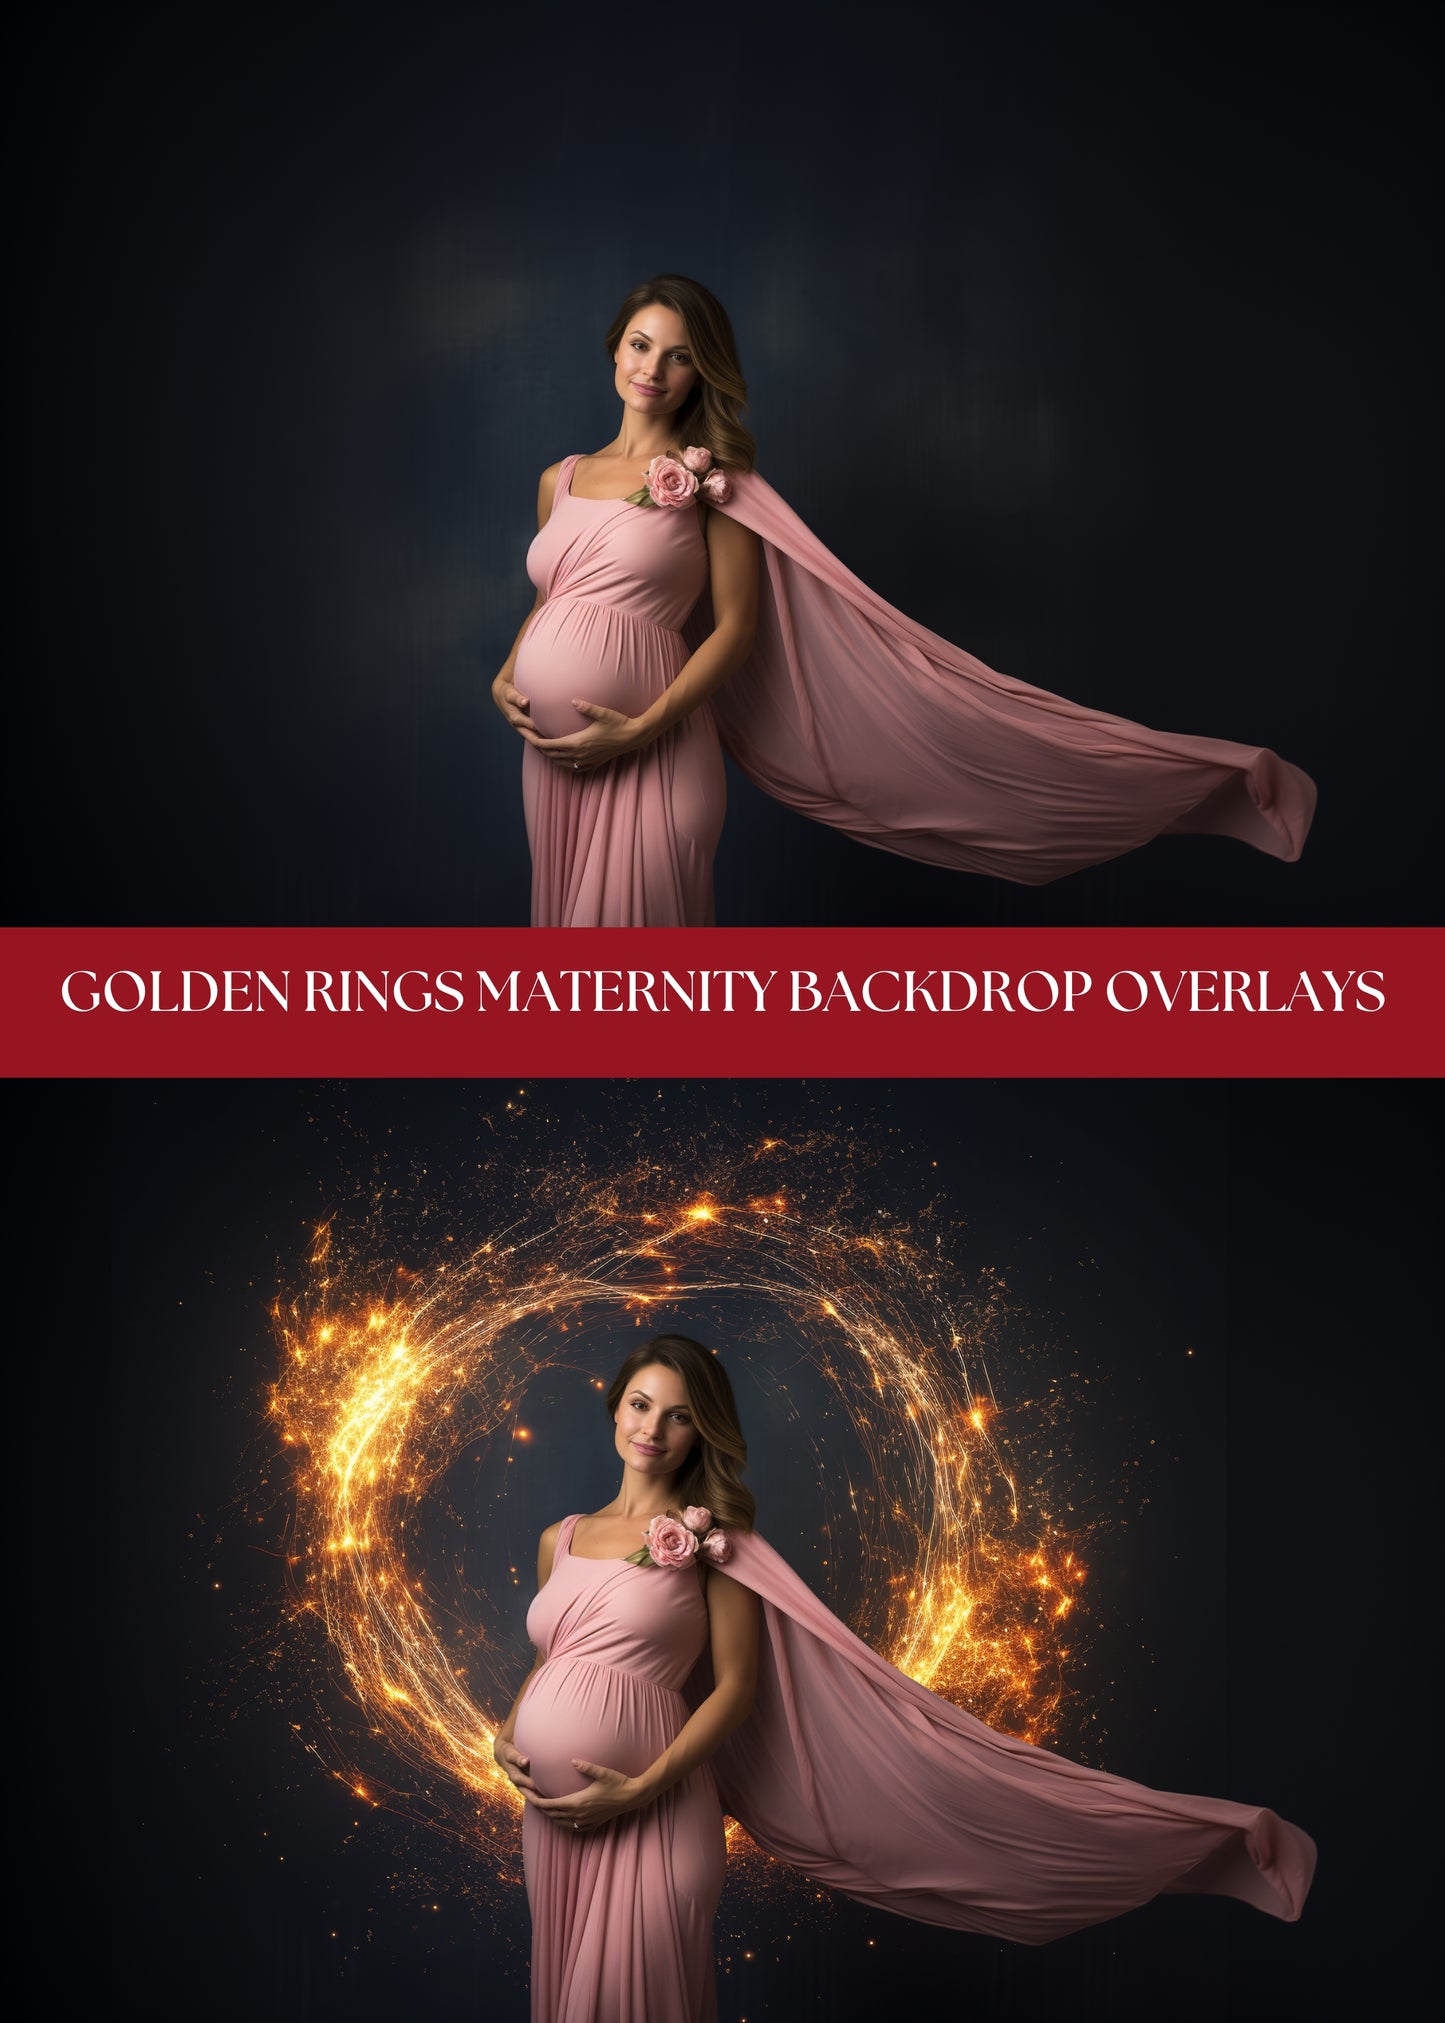 Gold Ring Maternity Backdrop Overlays